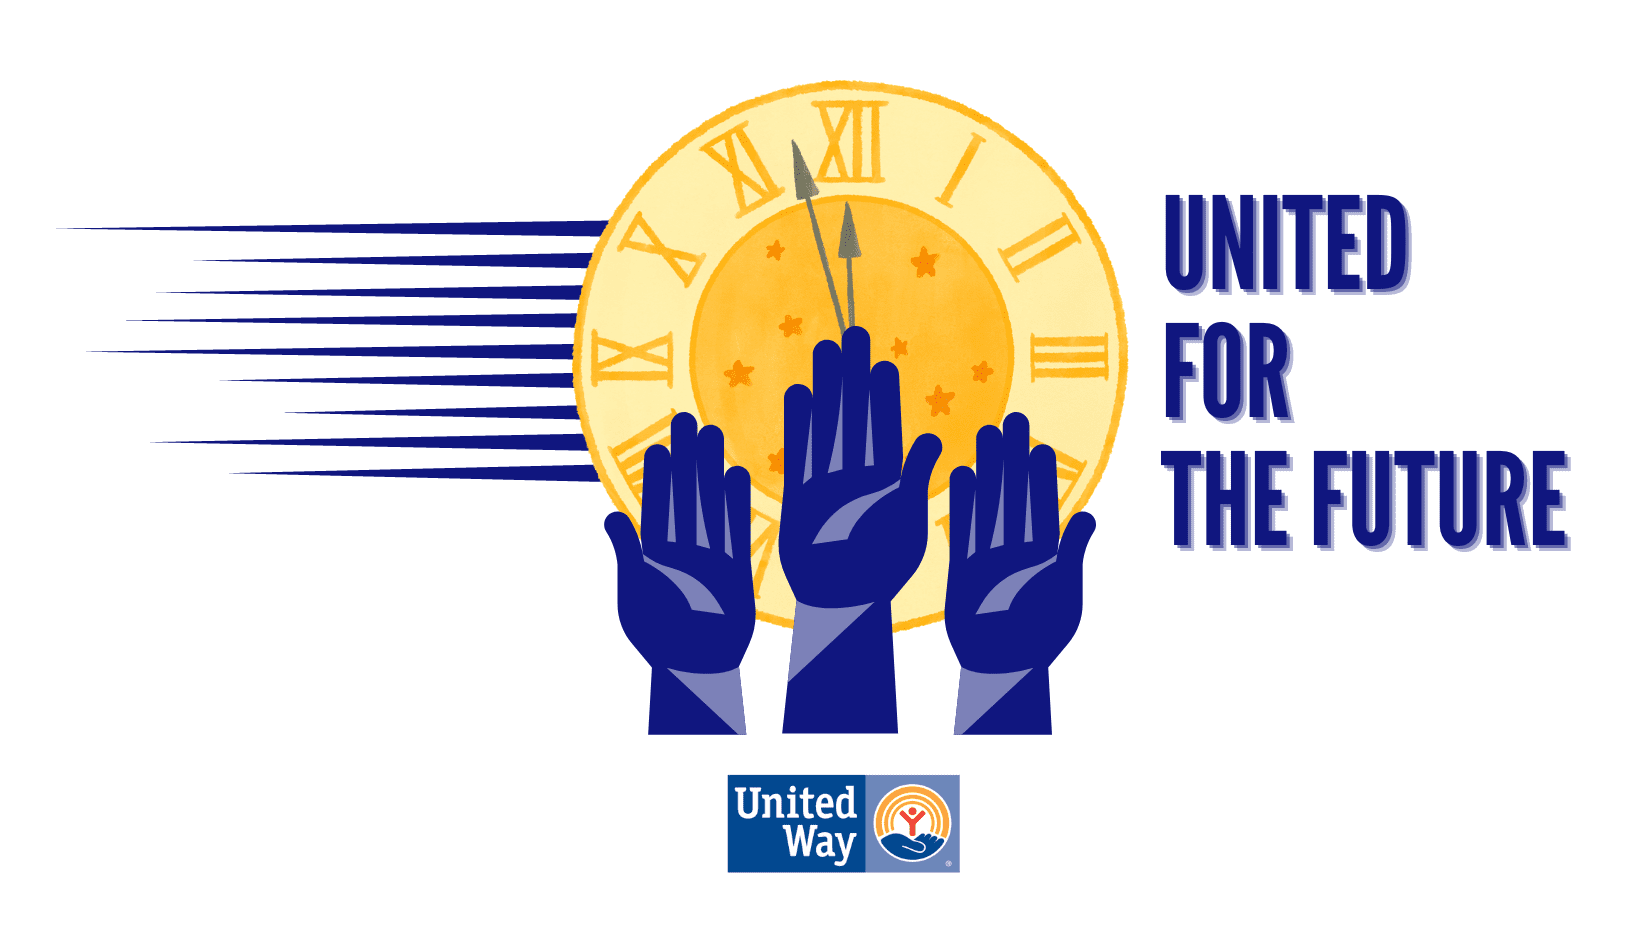 United Way "United for the Future" graphic